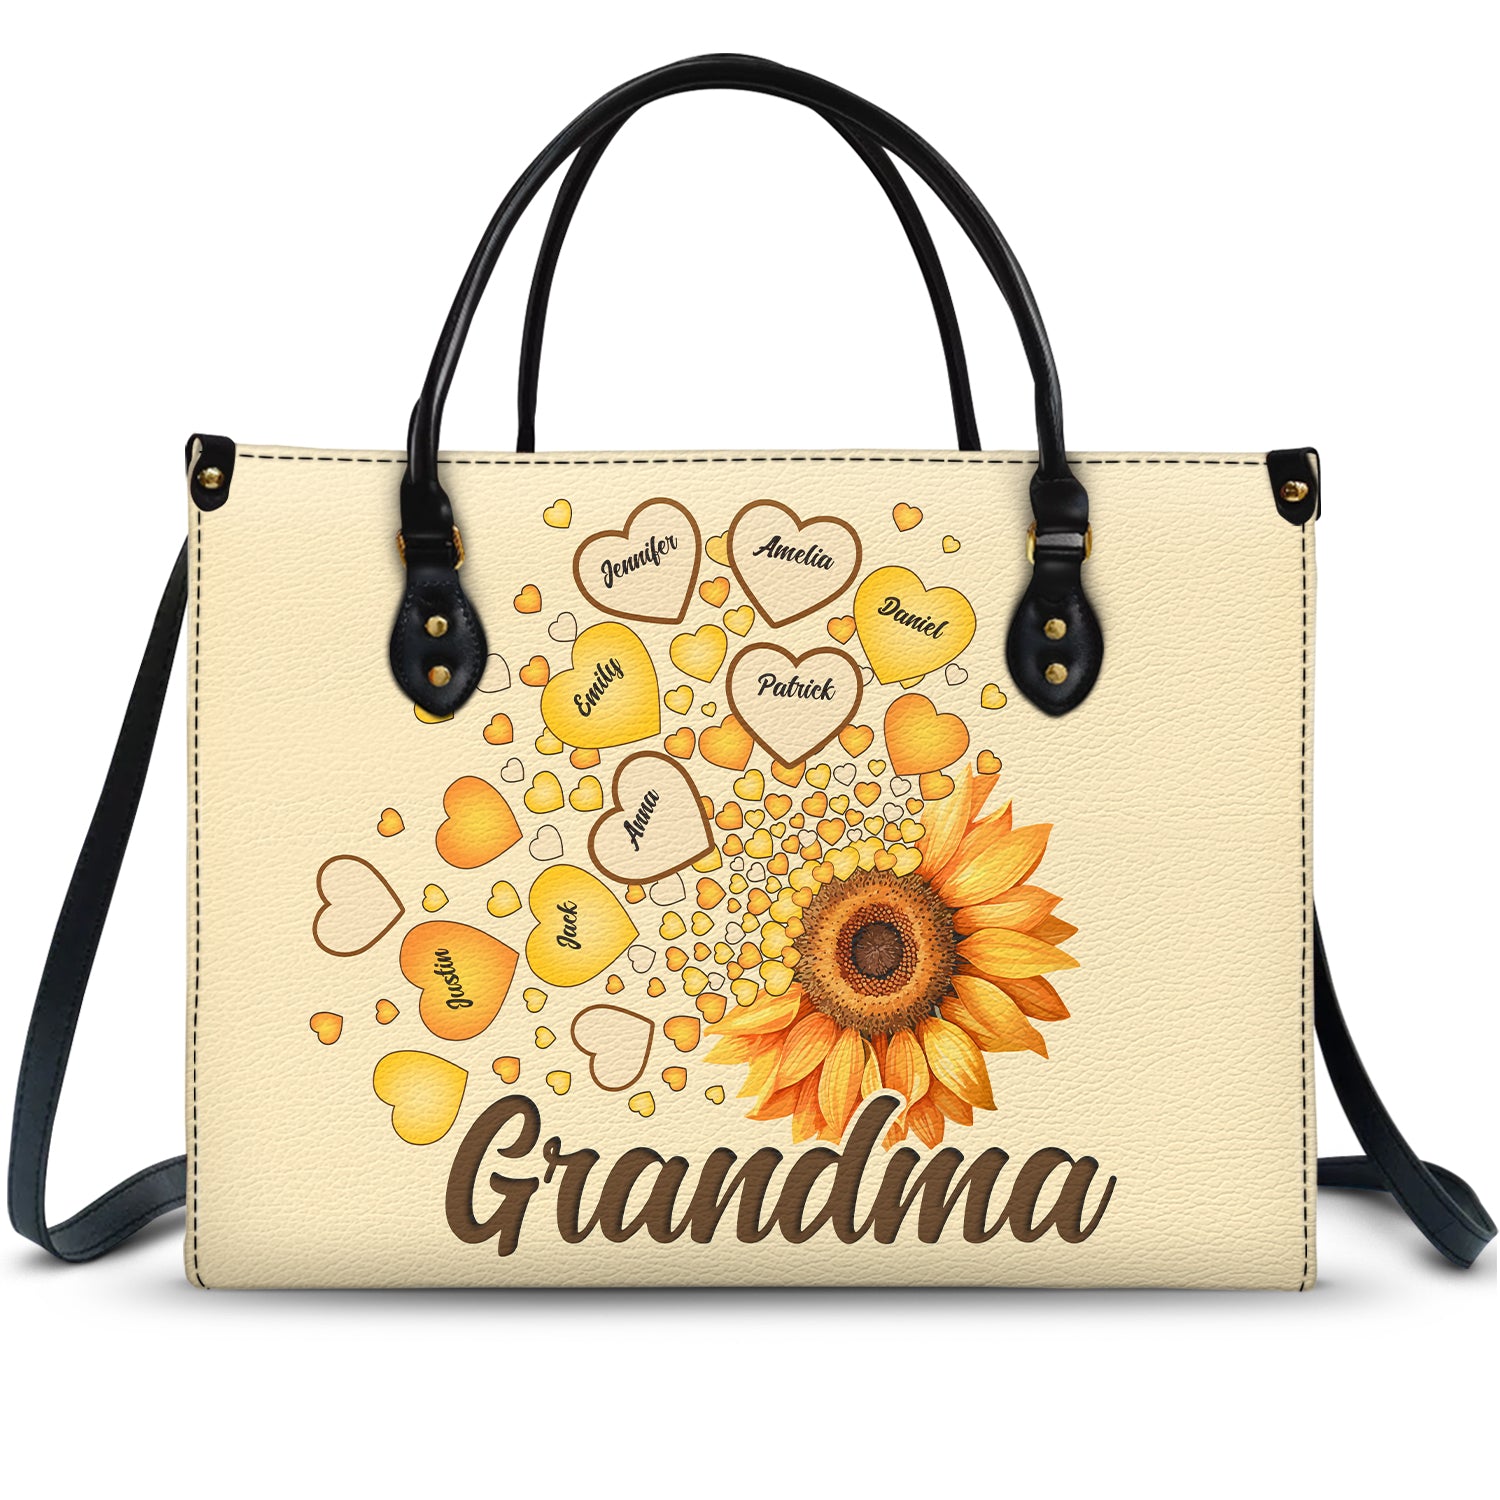 Grandma Mom Kids Sunflower - Gift For Mother, Grandmother - Personalized Leather Bag